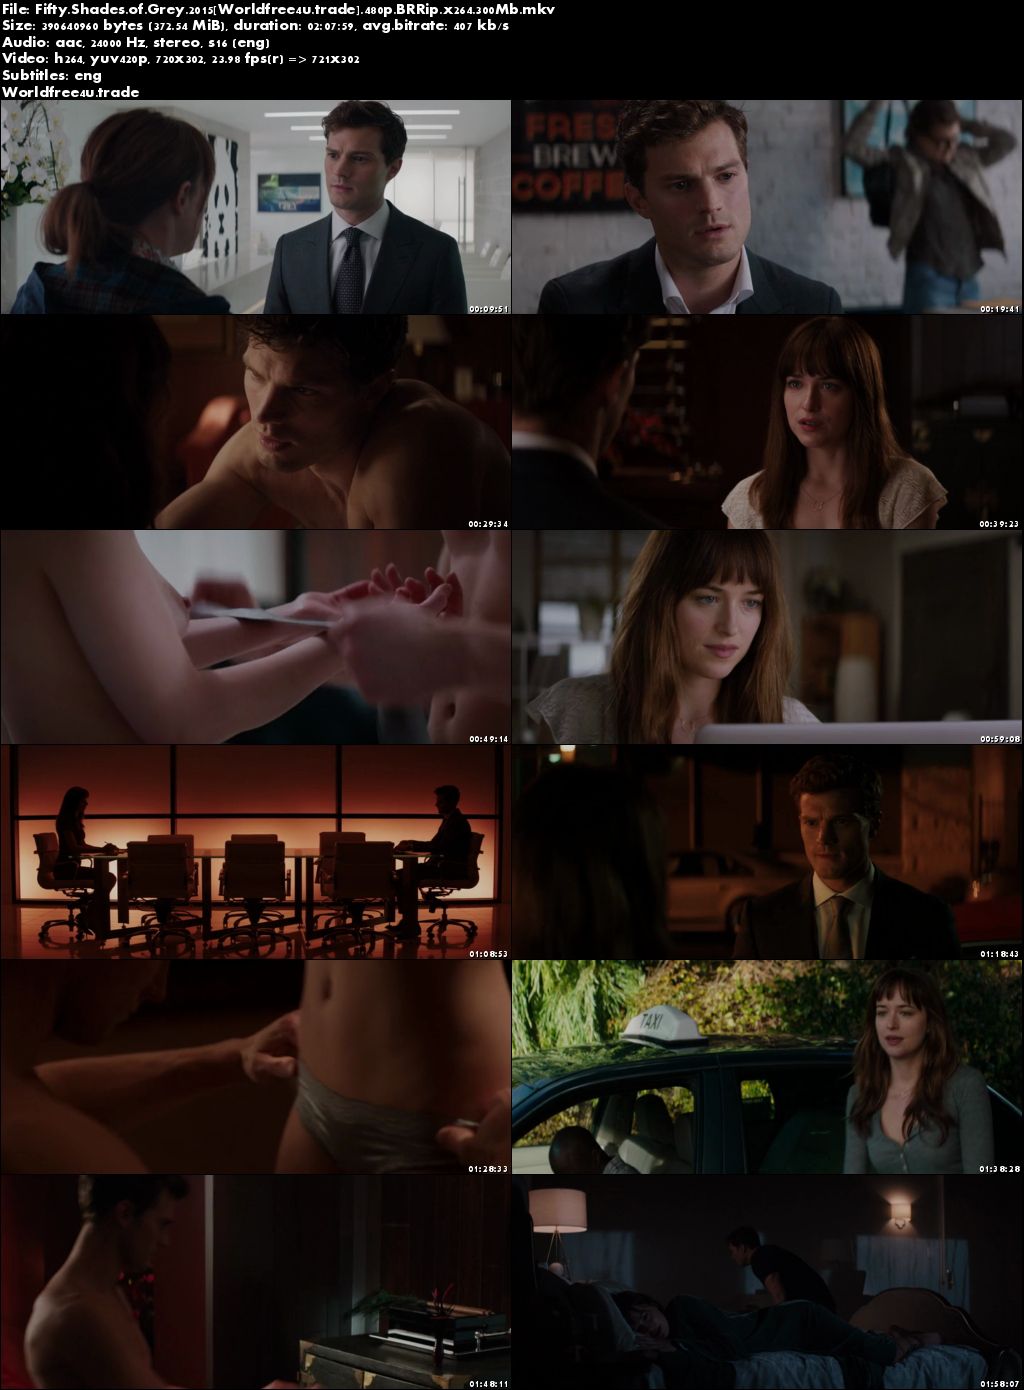 fifty shades of grey full hd hindi dubbed movie online